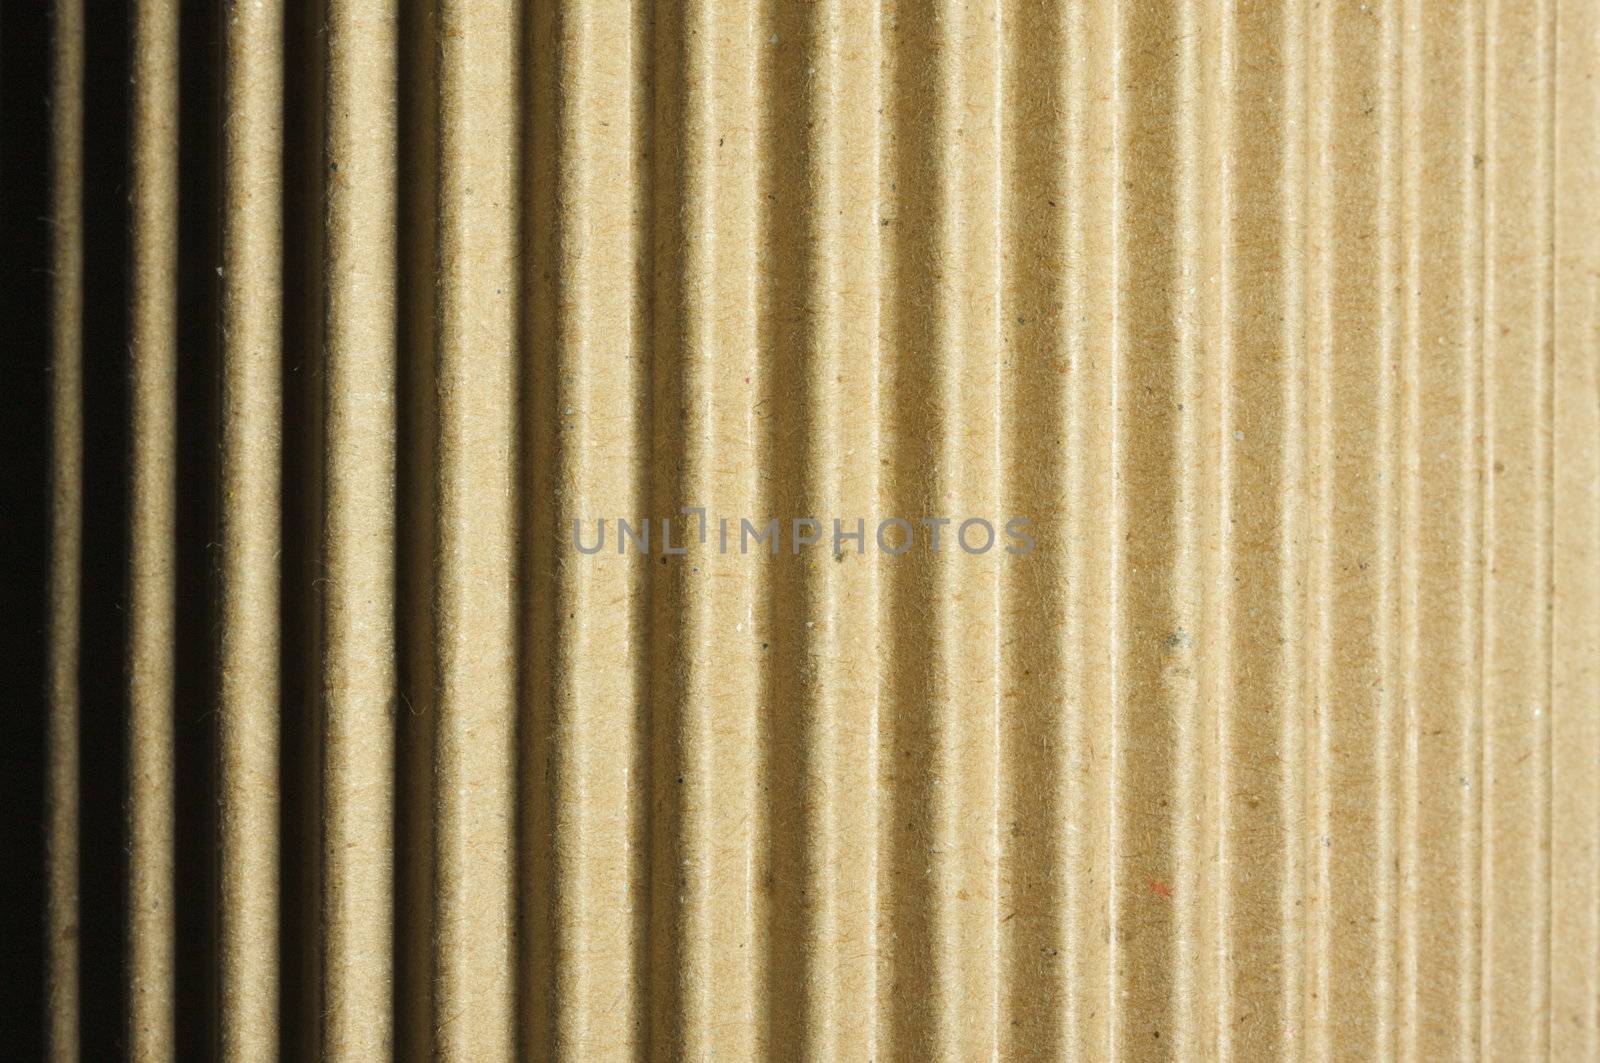 Rounded Corrugated Cardboard by Feverpitched